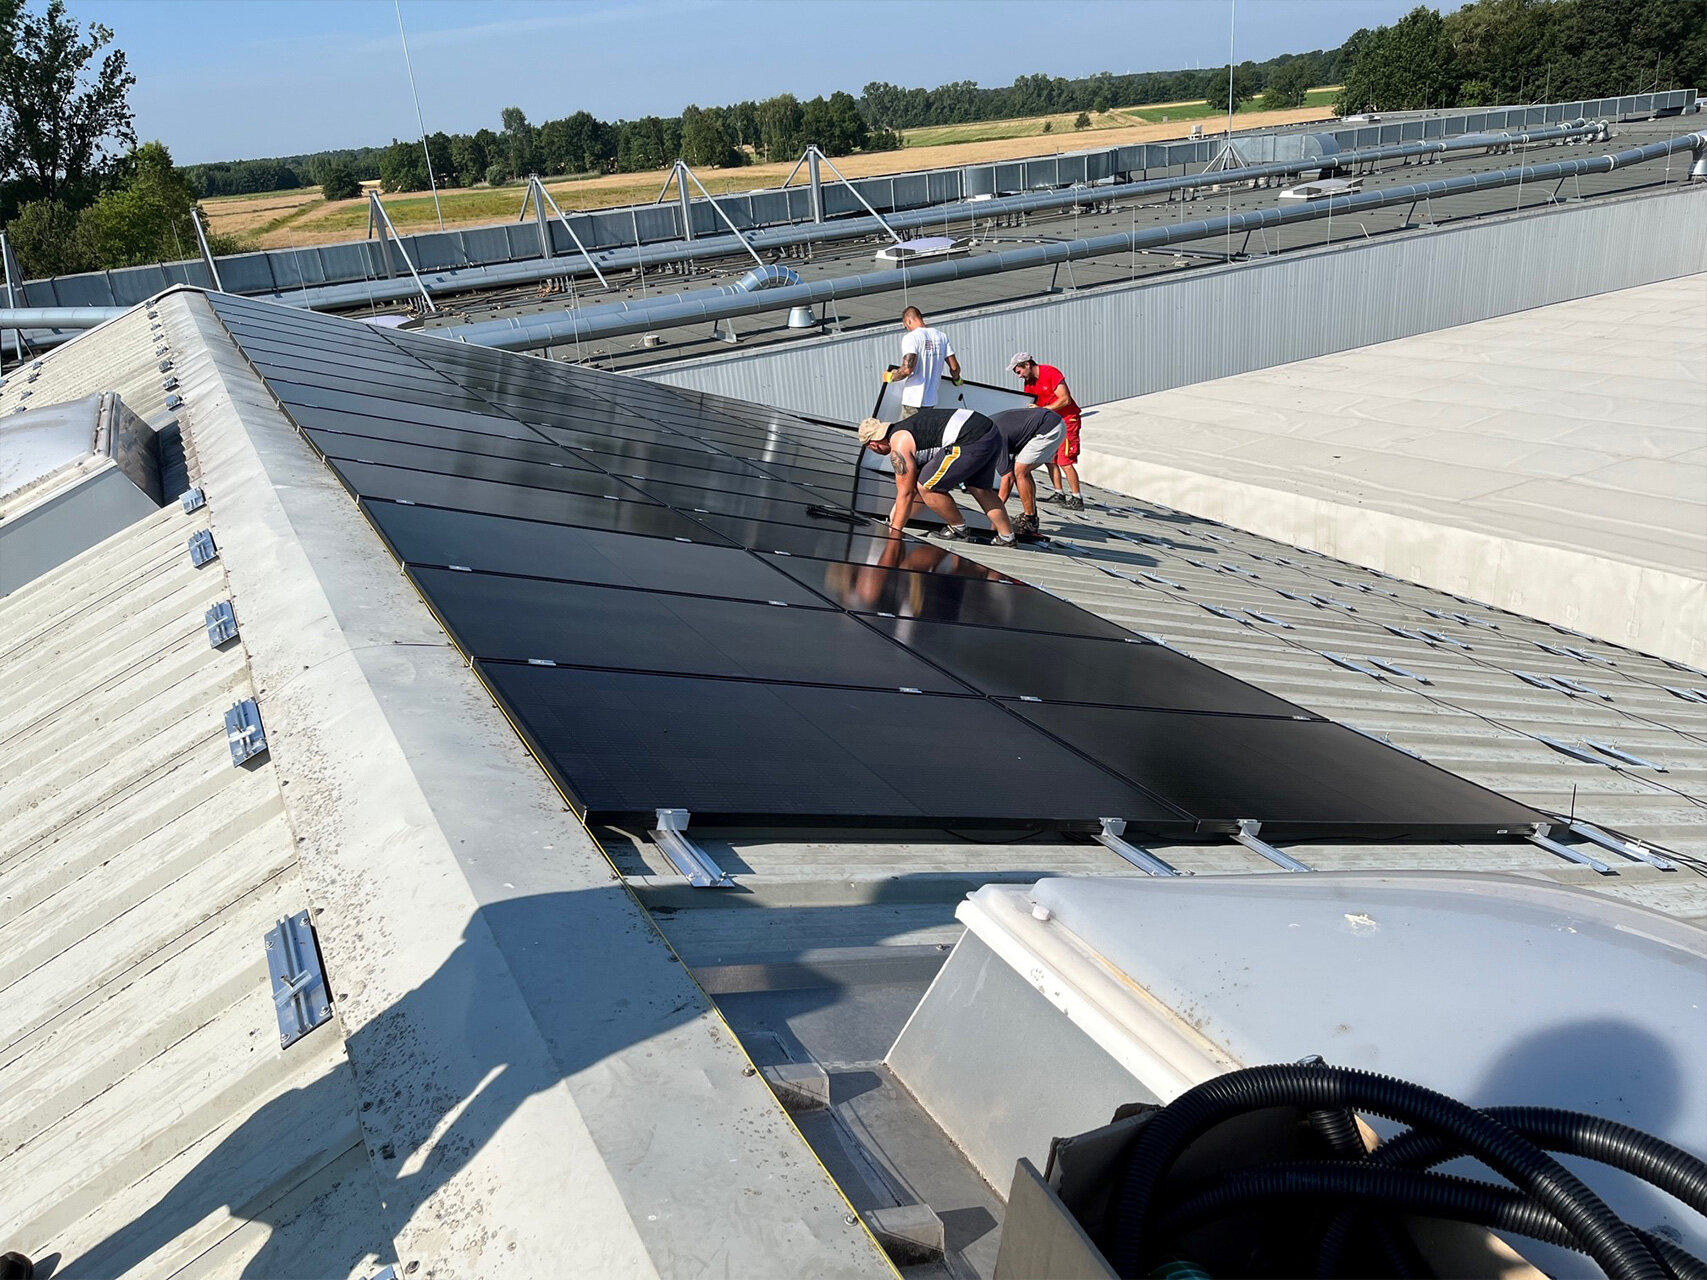 Installation of our photovoltaic system